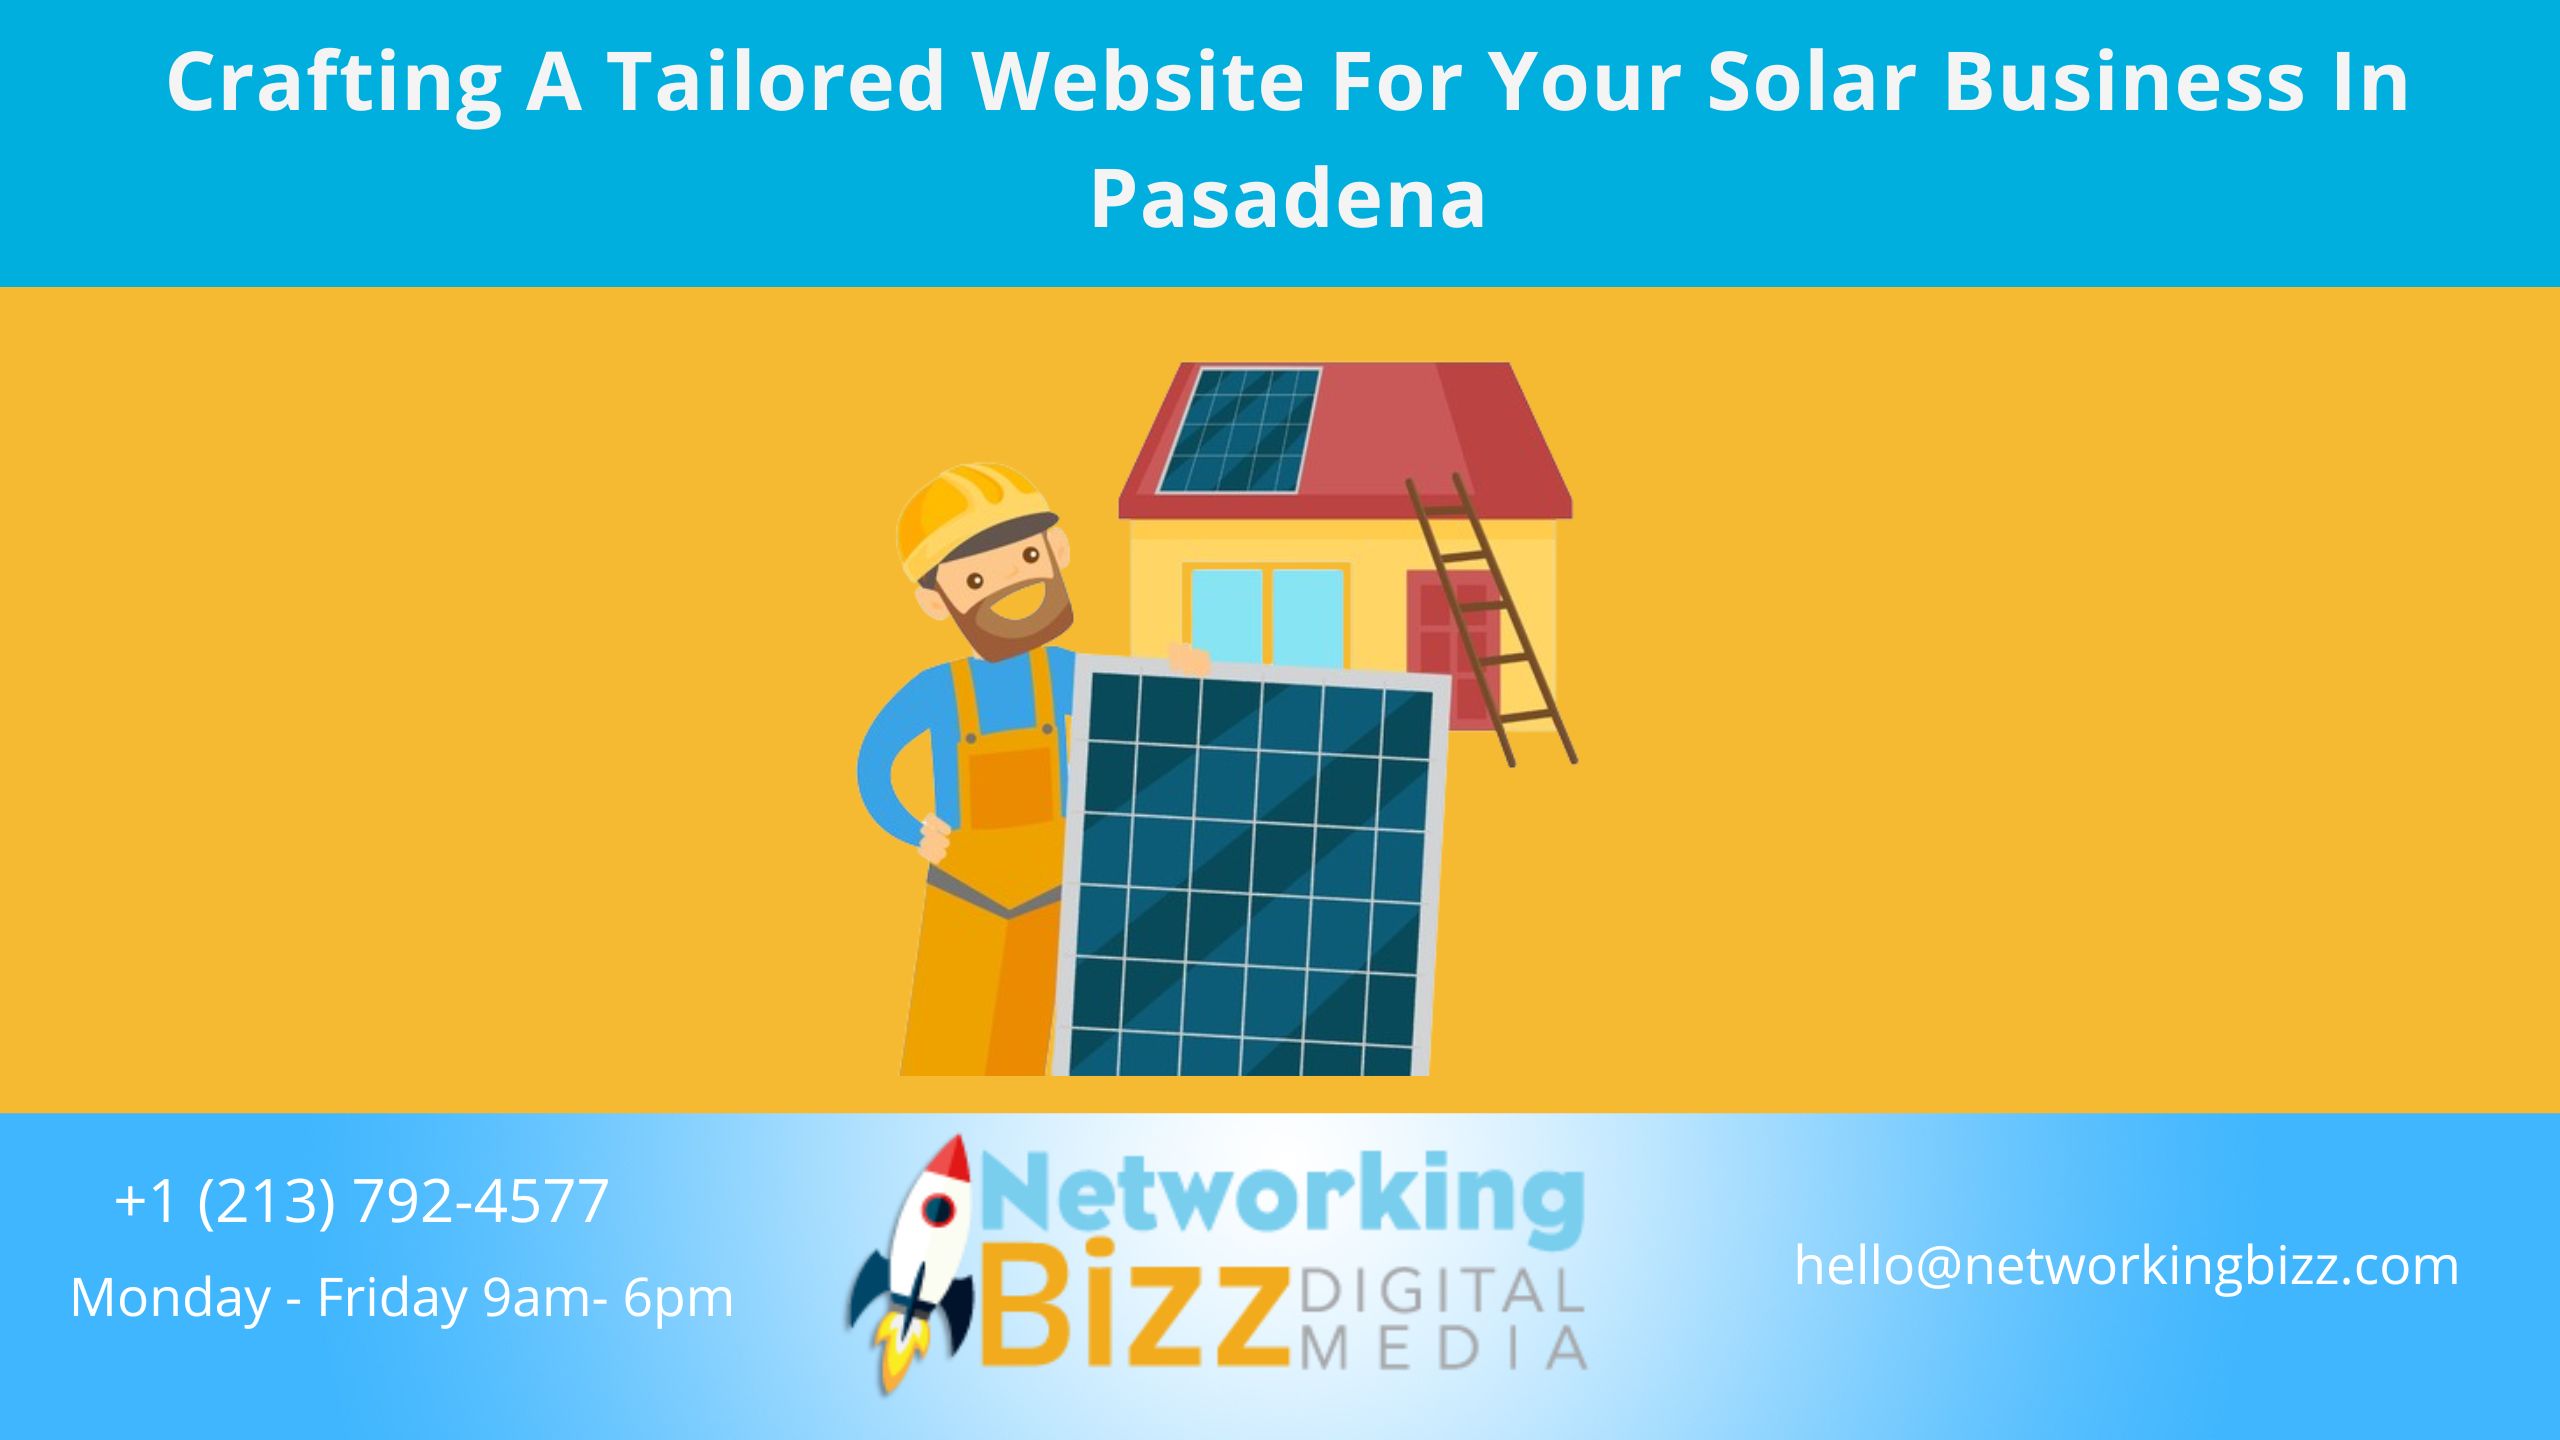 Crafting A Tailored Website For Your Solar Business In Pasadena